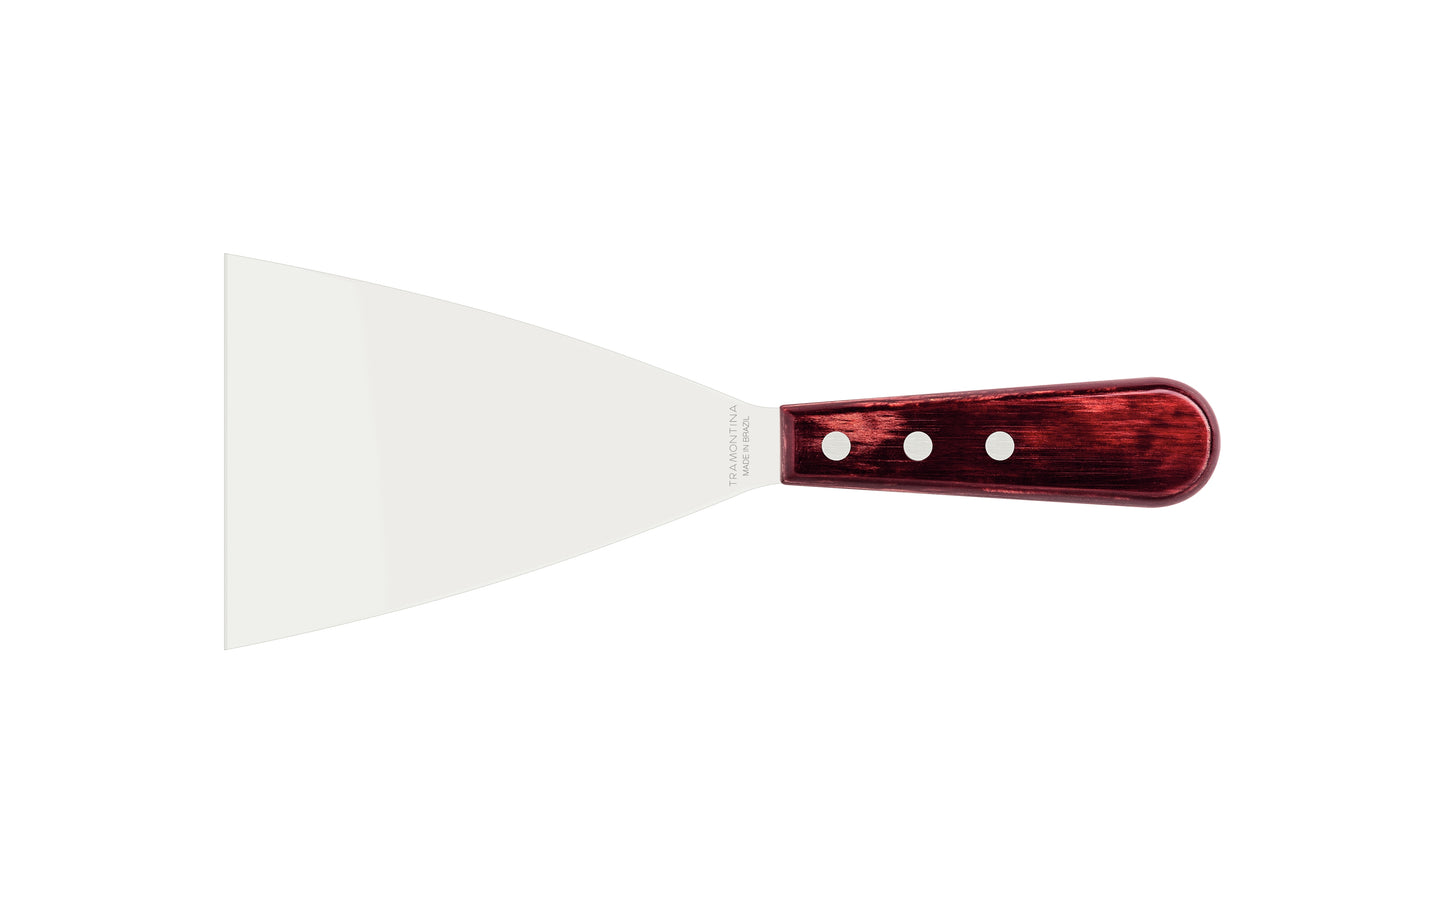 Tramontina Scraping Spatula Stainless-Steel Blade 5" Treated Red Polywood Handle - 21166/175